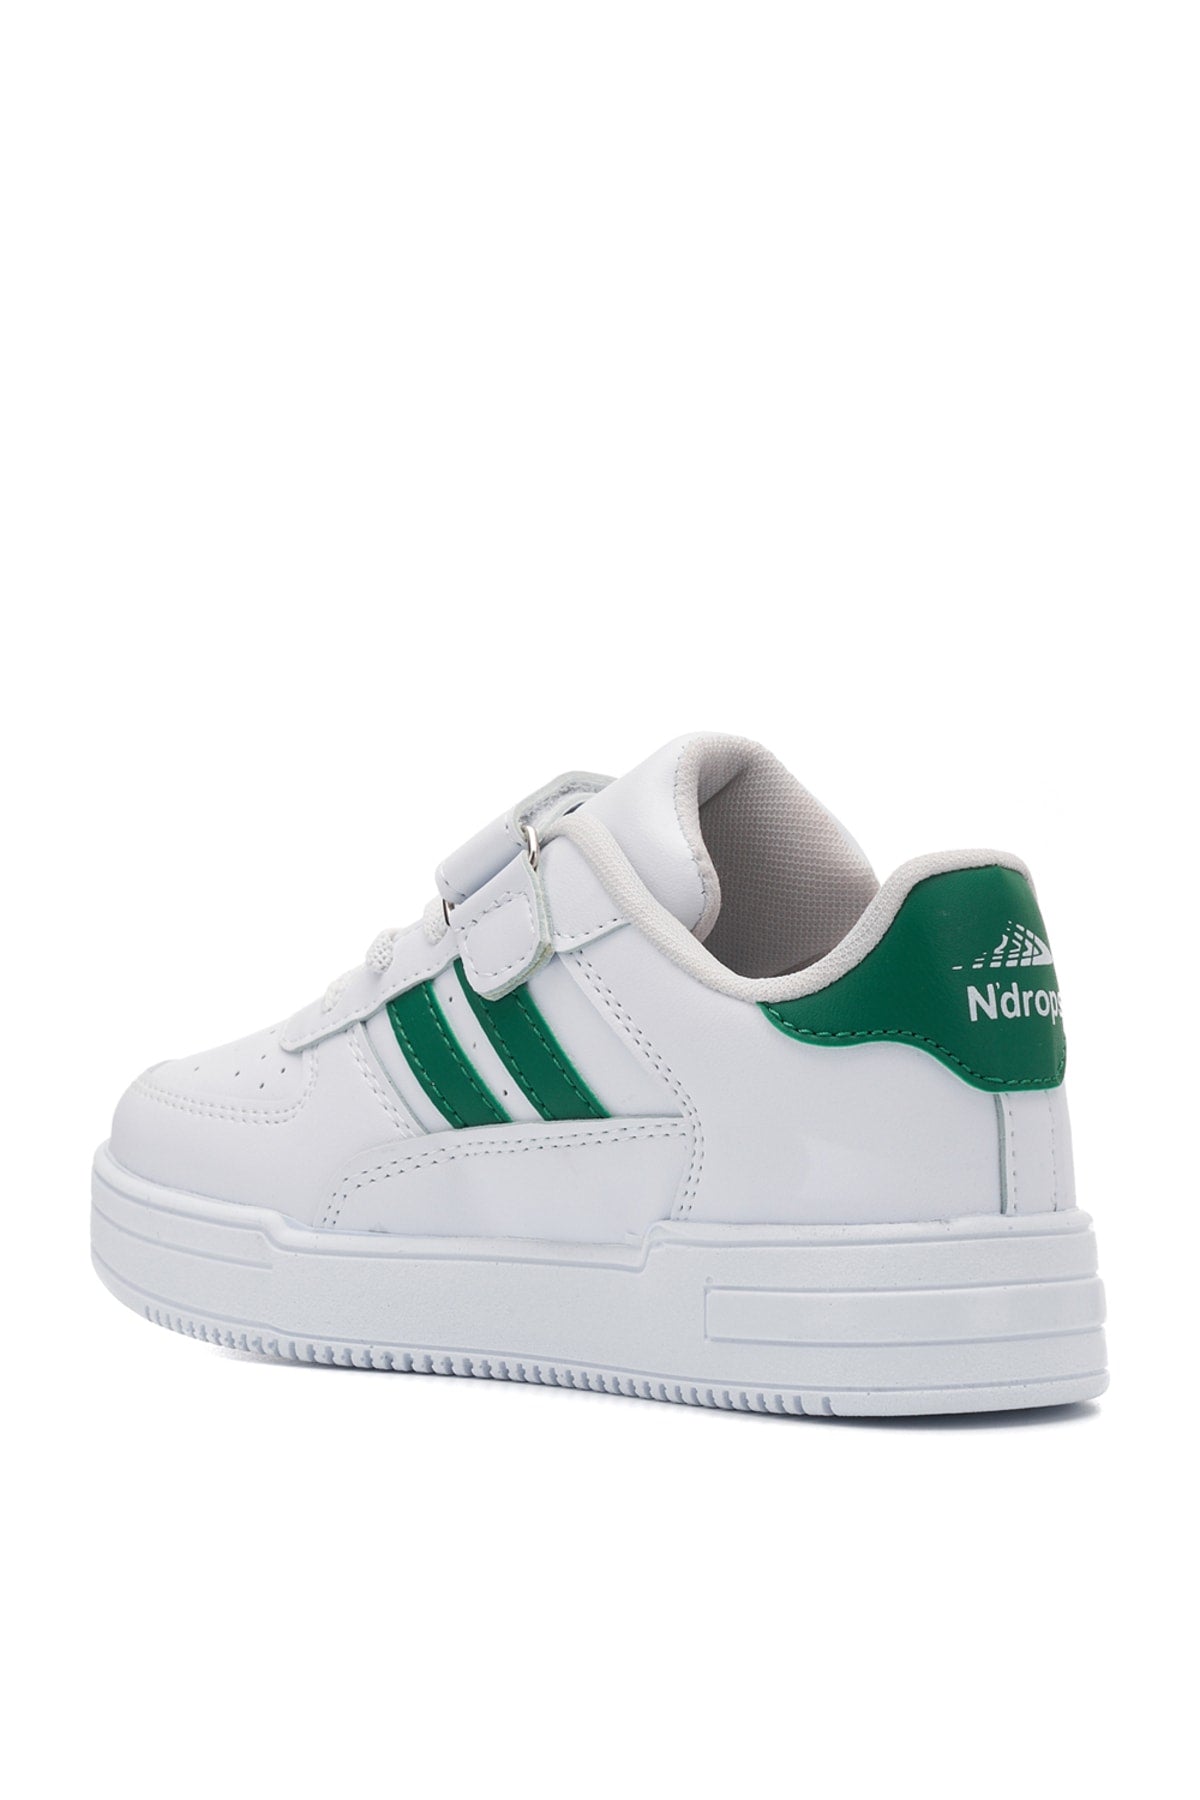 Orthopedic, Velcro, White Green Color Kids Sports Shoes